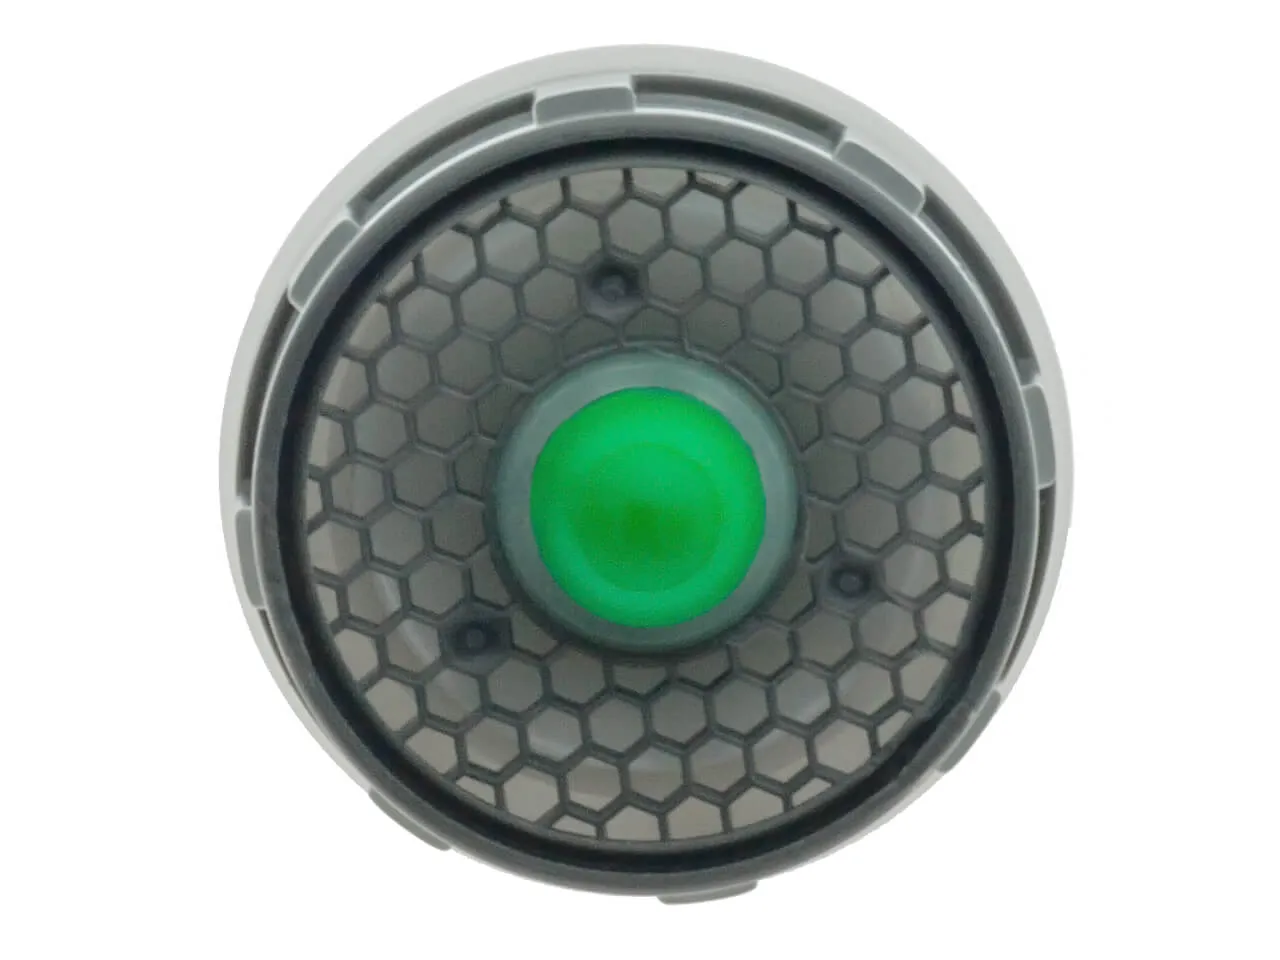 Neoperl Push aerator insert with button - 5 or 11 l/min